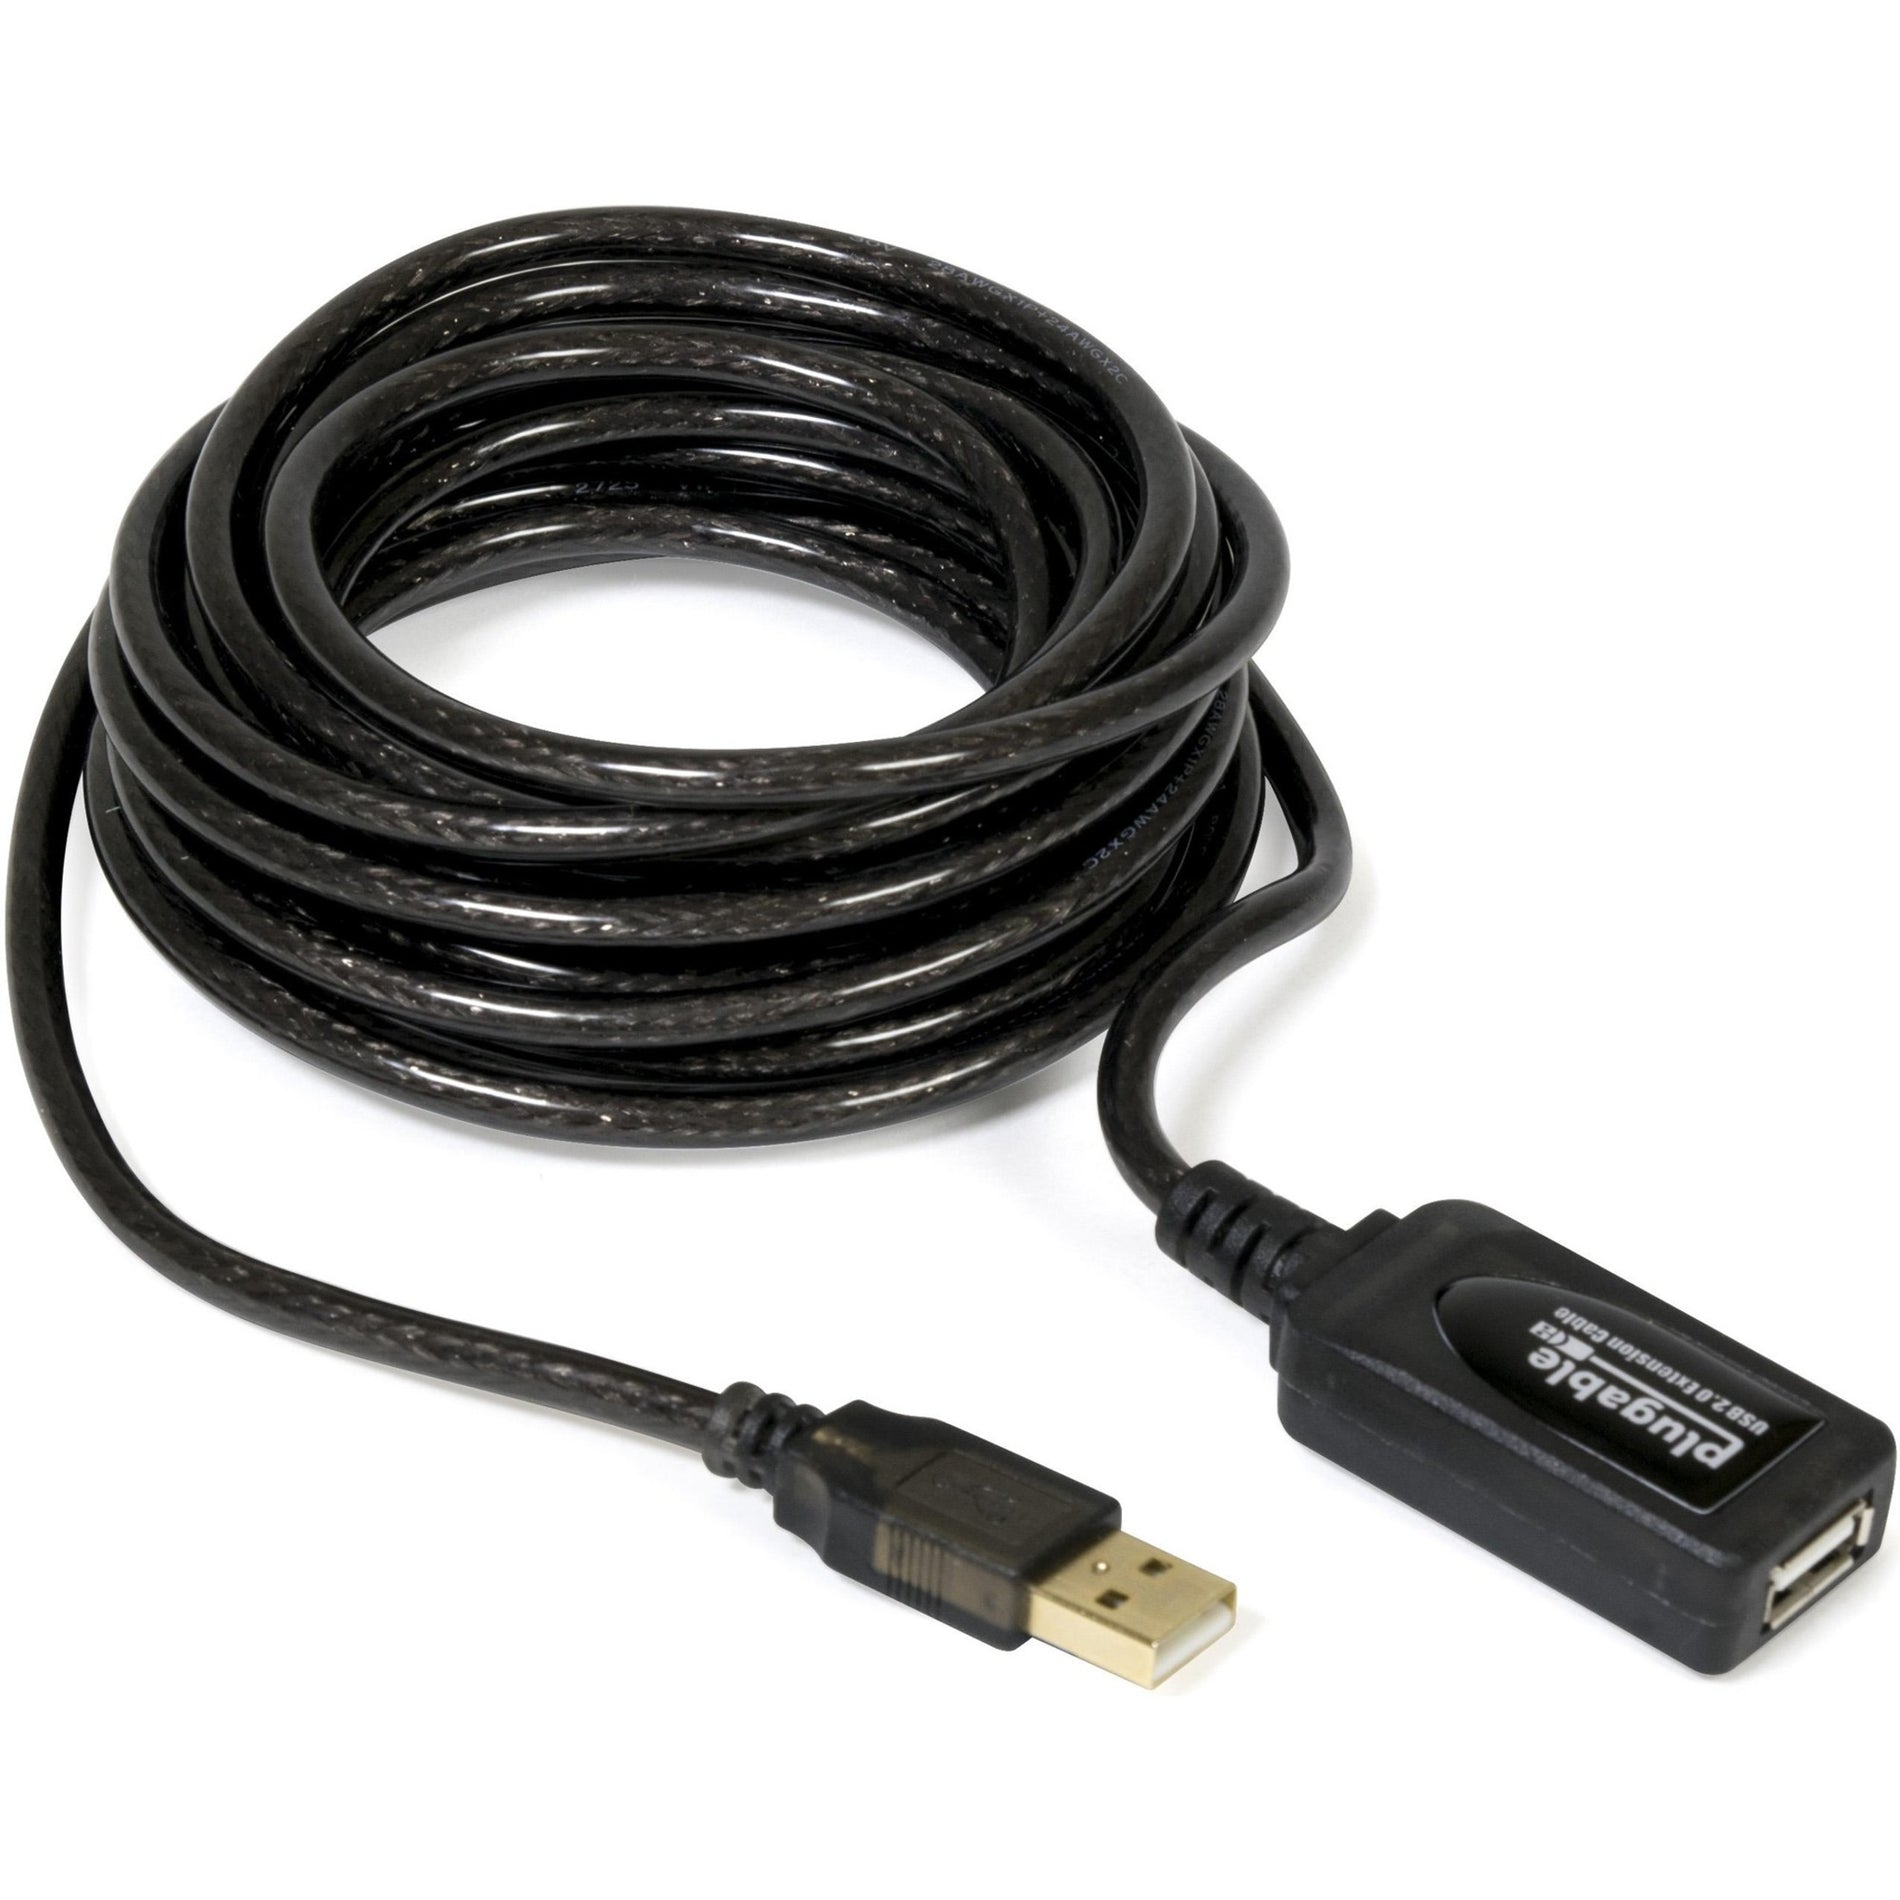 Plugable USB2-5M USB 2.0 Active Extension Cable (5m/16ft), 480 Mbit/s Data Transfer Rate, Shielded